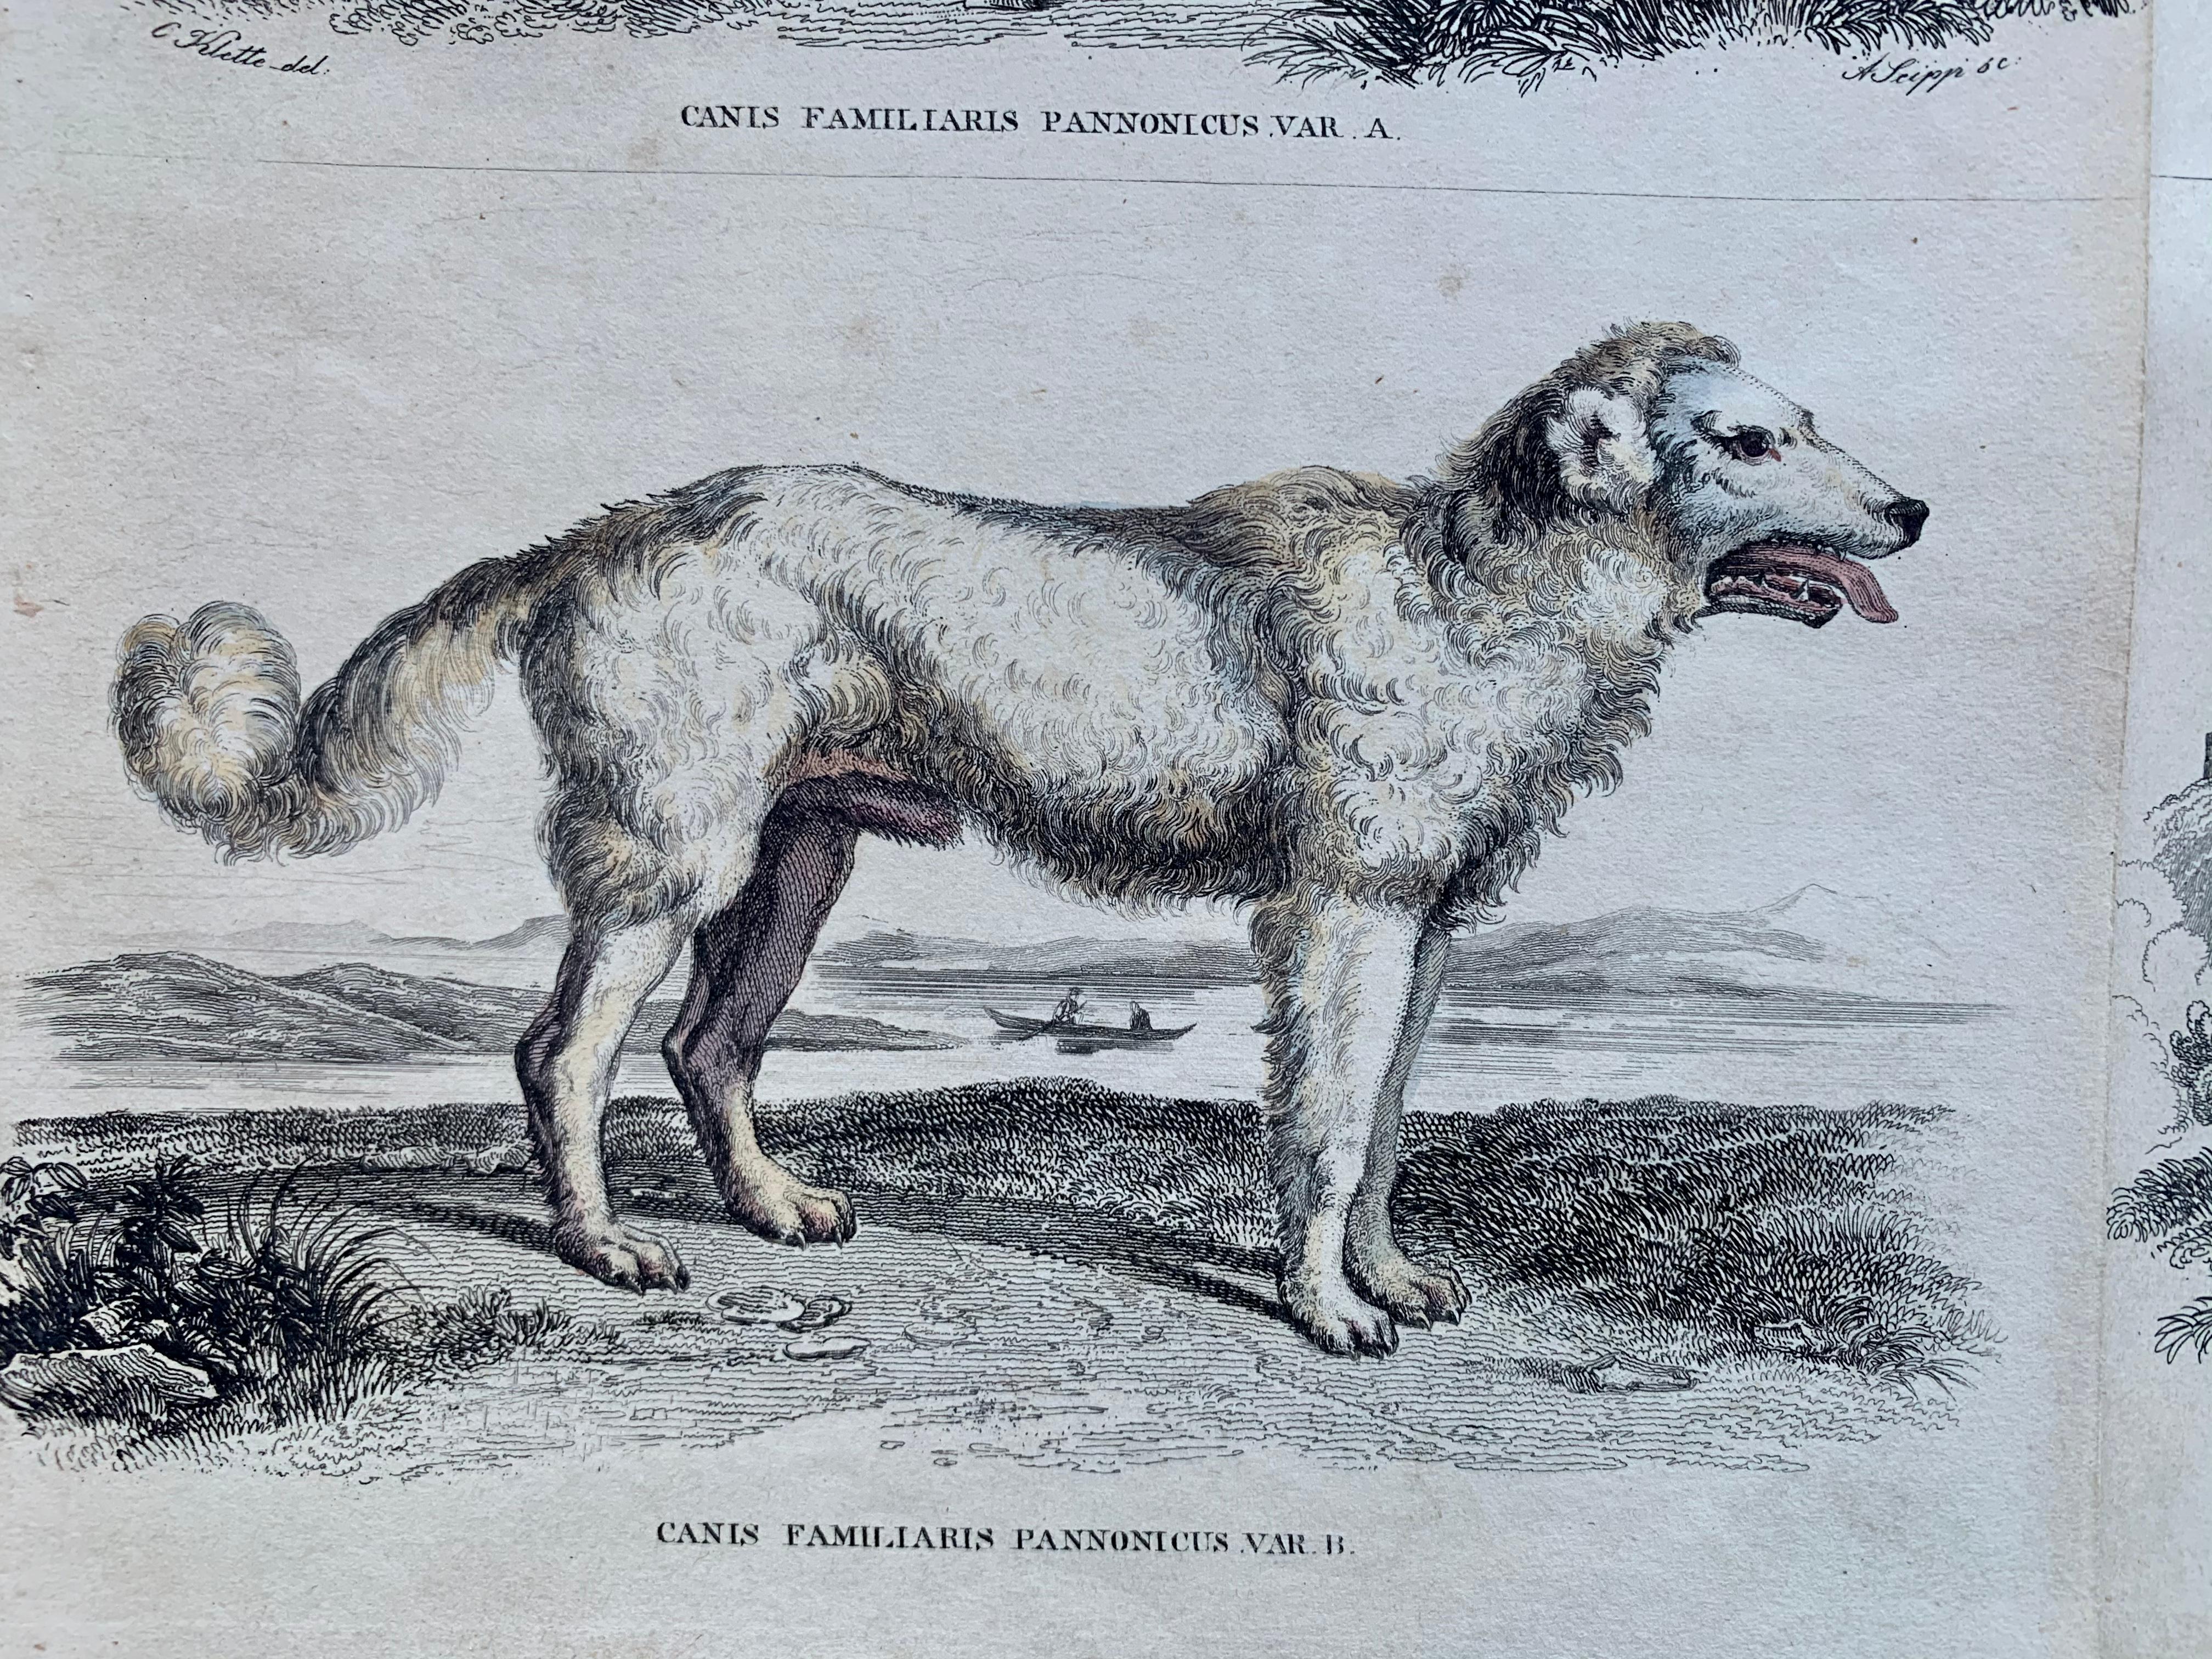 Set of 6 very fine hand colored prints (3 sheets) of large and powerful canines. Published in 1840 based on the work of Scottish naturalist, Sir William Jardine, 7th Baronet. 

Depicting; Wolves, Guard Dogs (likely Hungarian Kuvasz Sheep dogs) and